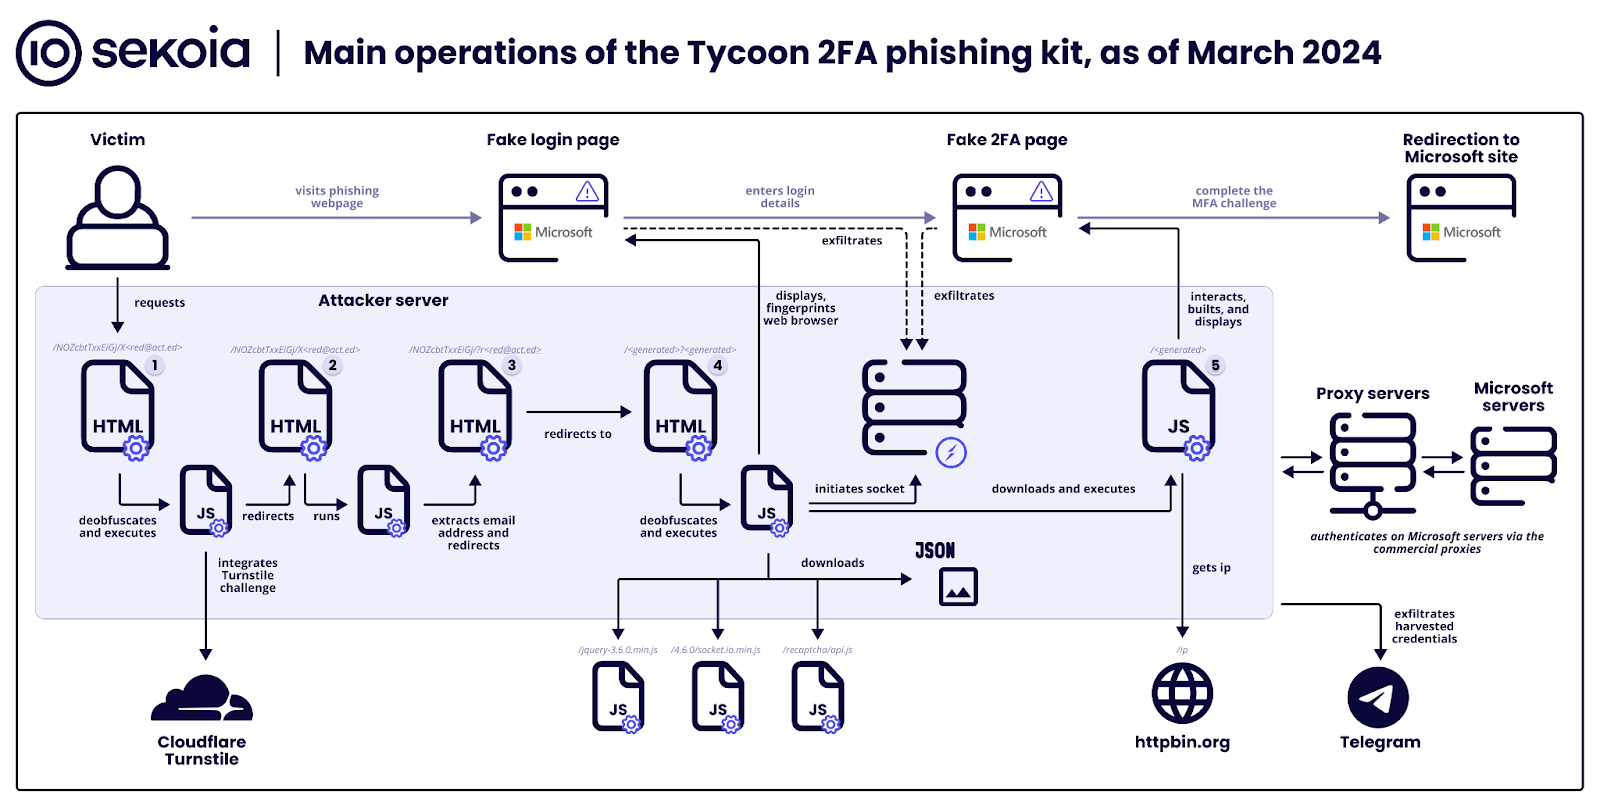 An infographic from Sekoia that lays out the Tycoon 2FA phishing kit operation.